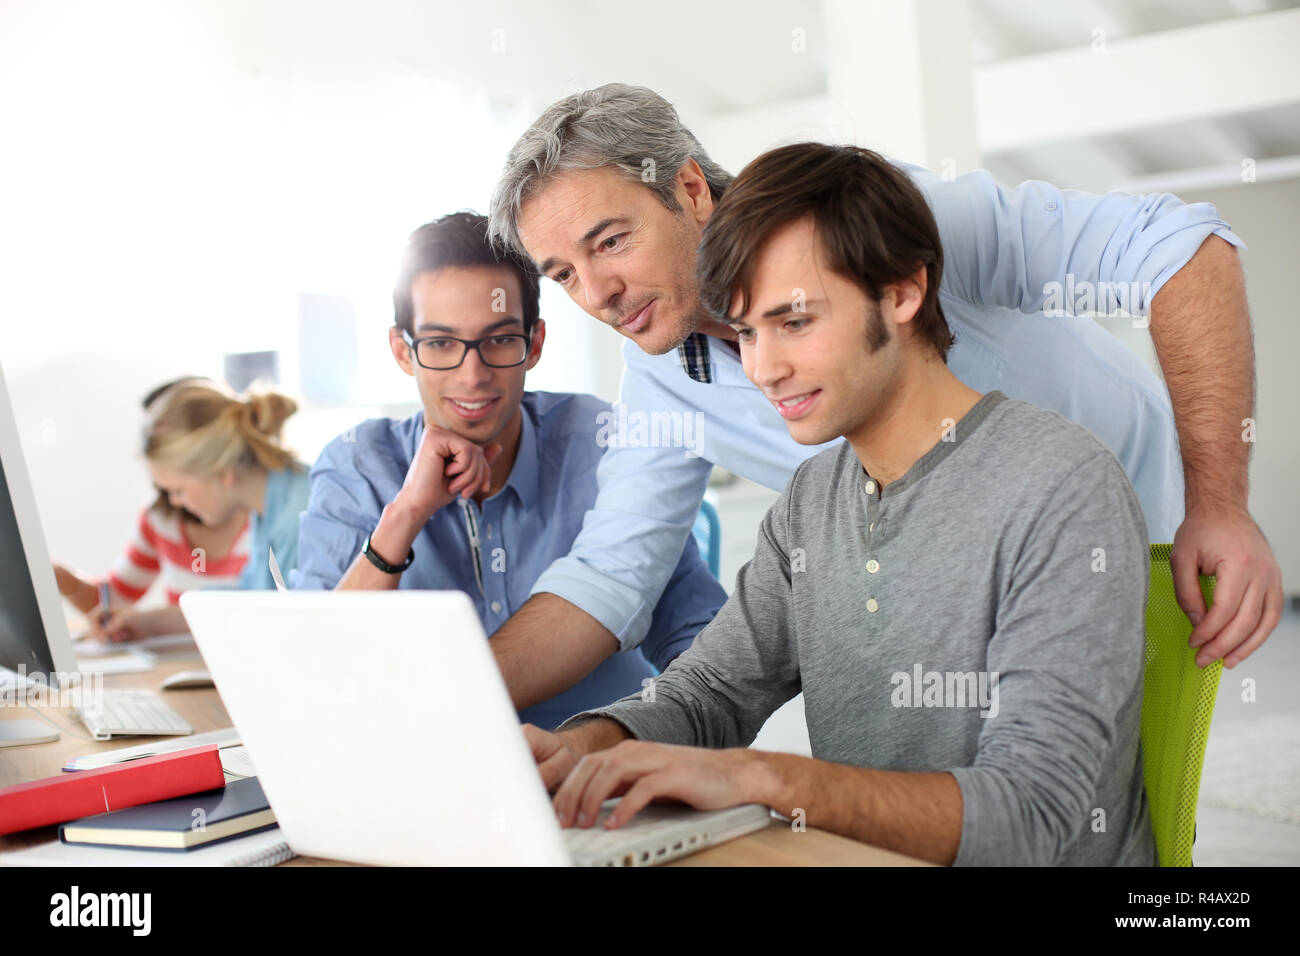 Students in class with teacher helping with work Stock Photo